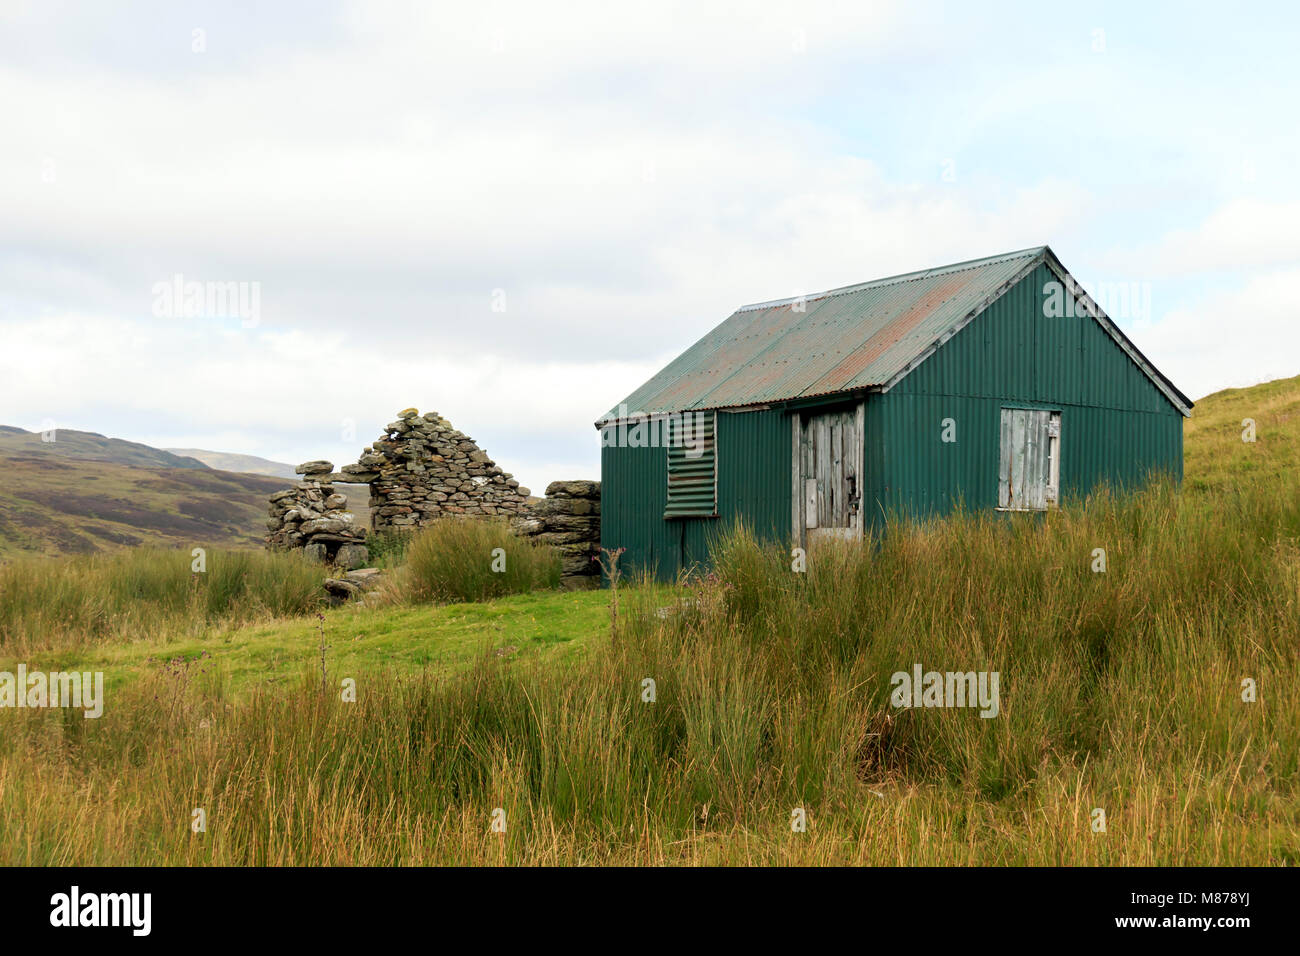 Ruins of an old crofters cottage and green shed with zinc roof  in the Scottish countryside Stock Photo